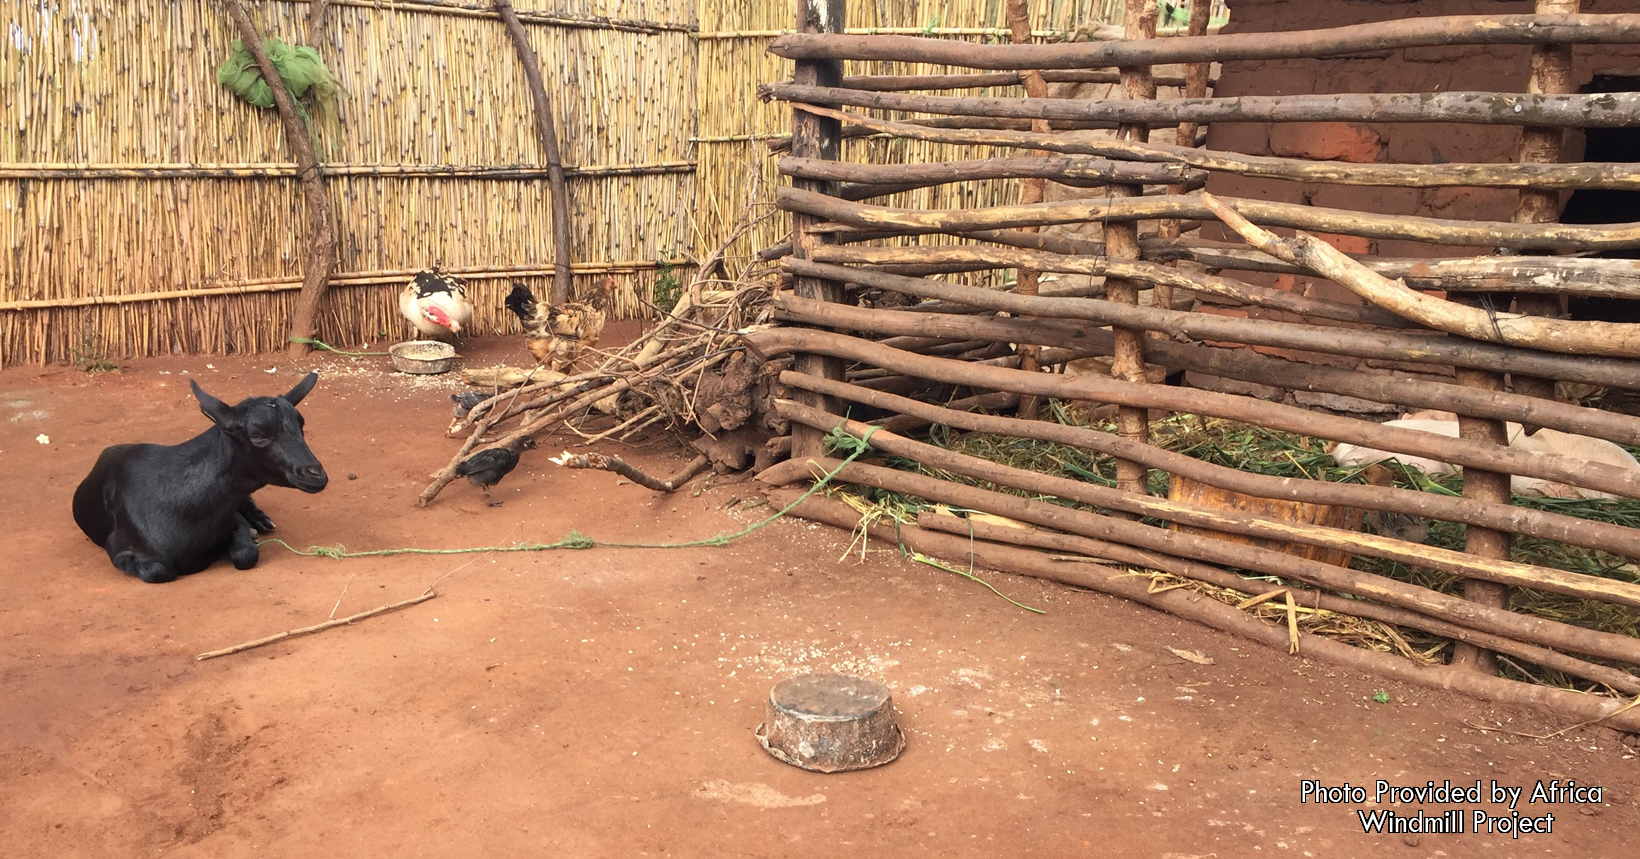 The Malaidza family have also purchased much livestock and begun to improve their living arrangements.